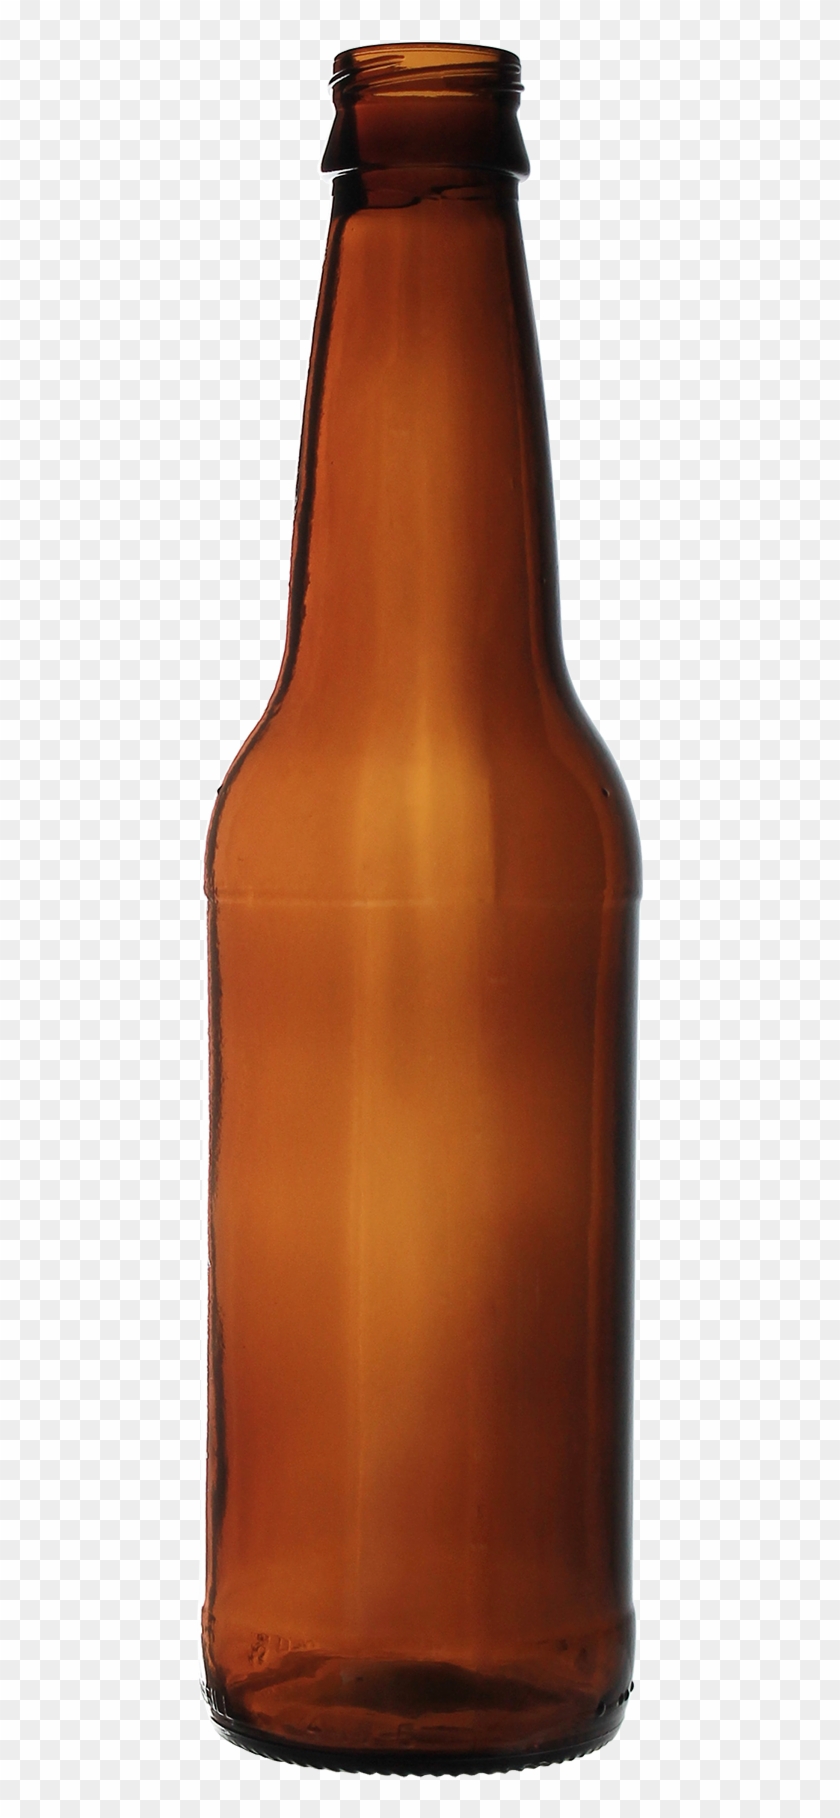 Graphic Free Library Oz Amber Long Neck All American - Open Beer Bottle Png Clipart